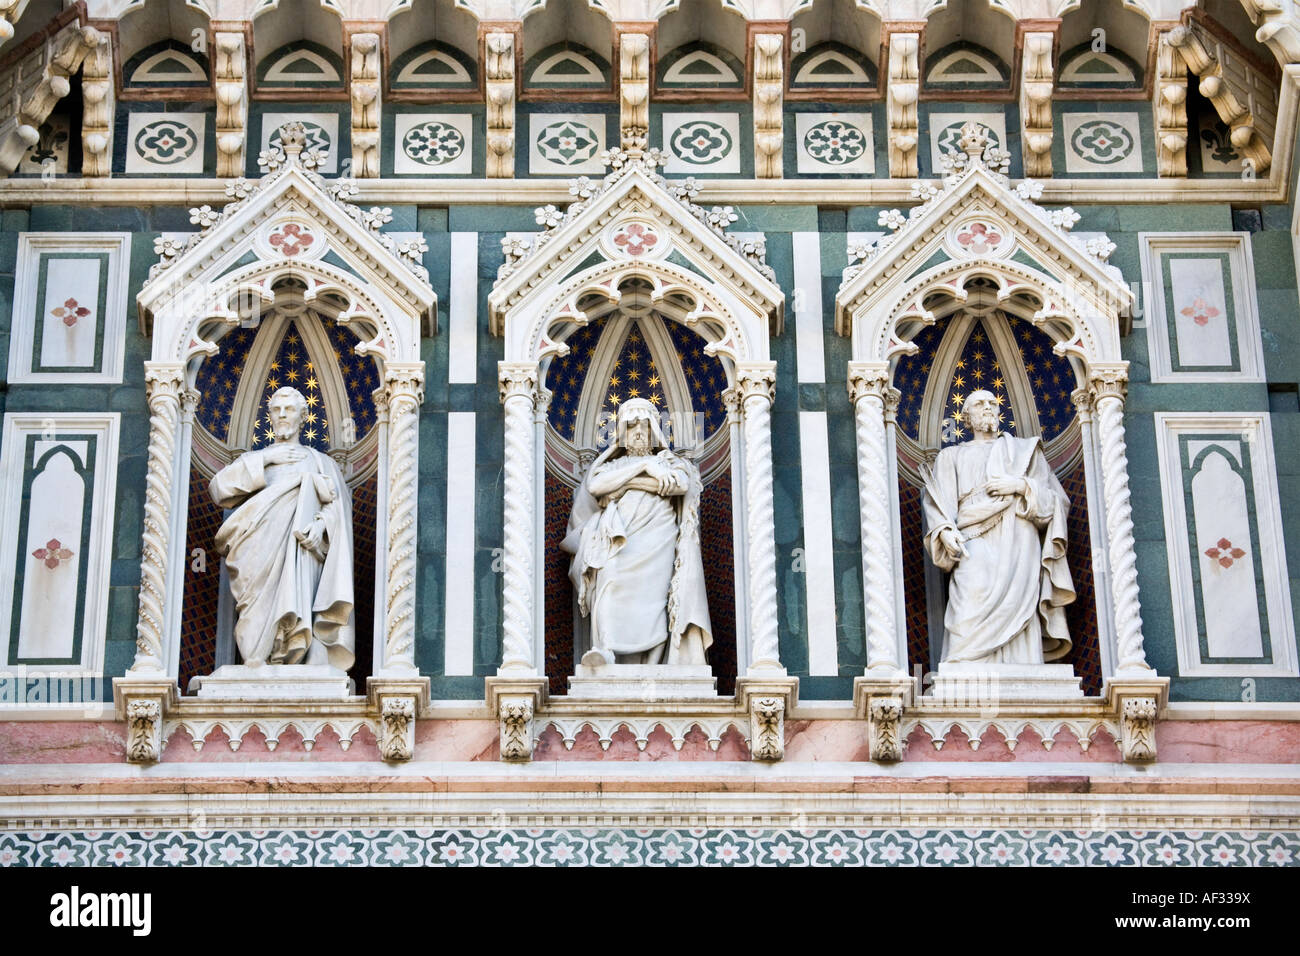 Religious statues on the main facade of Santa Maria del Fiore cathedral (Duomo) Florence, Italy Stock Photo